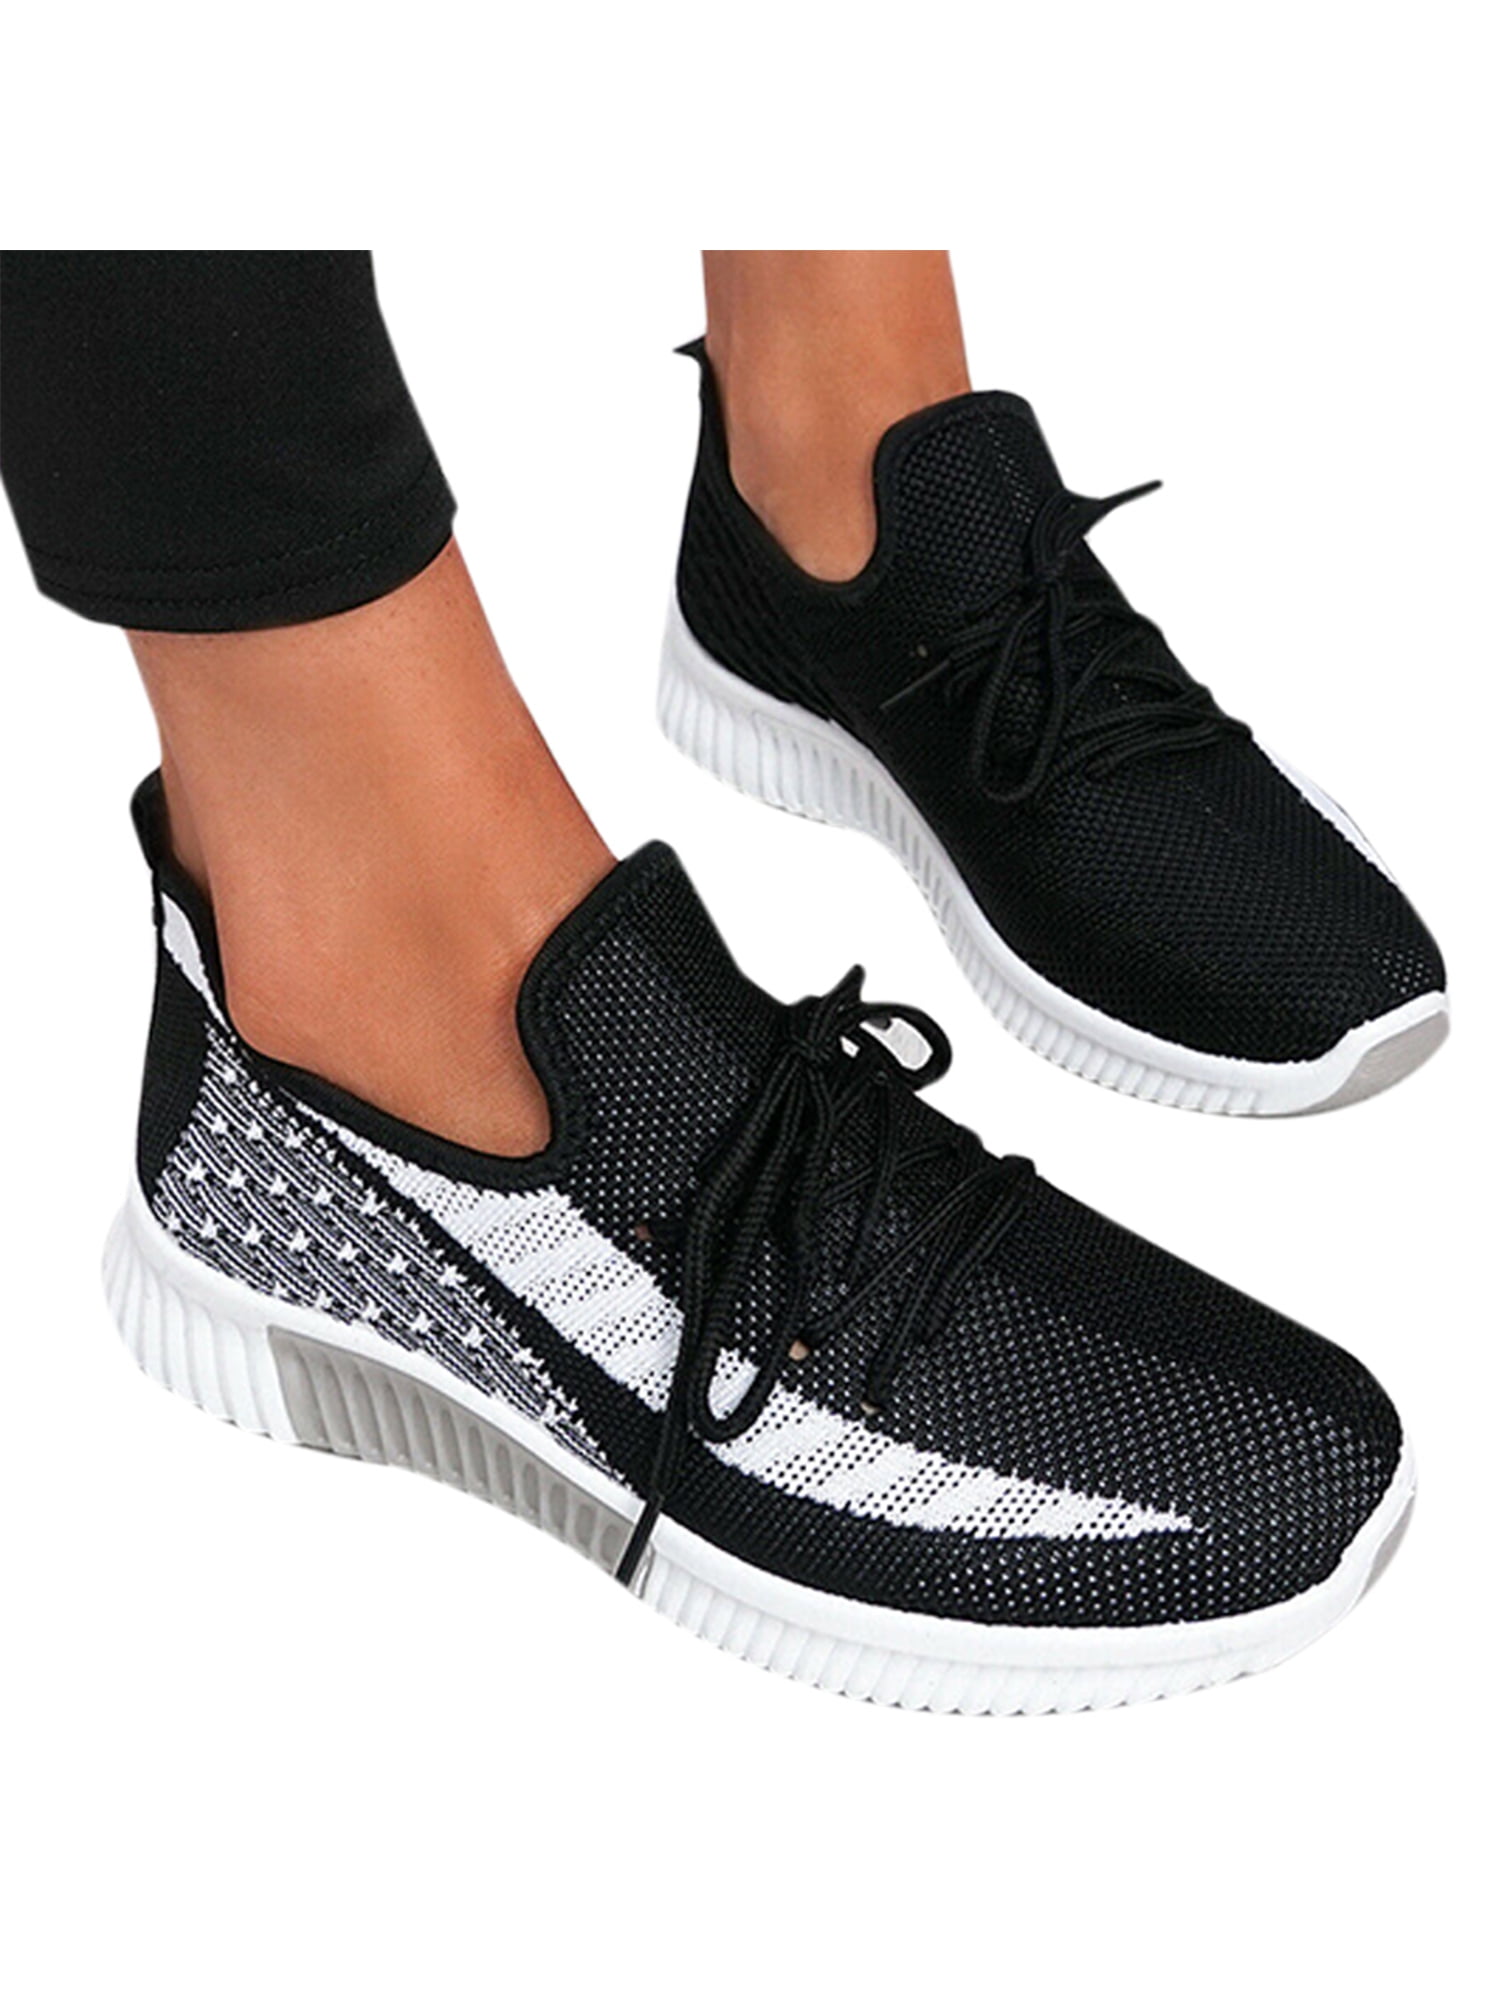 DEK LADIES WOMENS AIR SPORTS GYM FITNESS JOGGING RUNNING CASUAL TRAINERS SHOES 